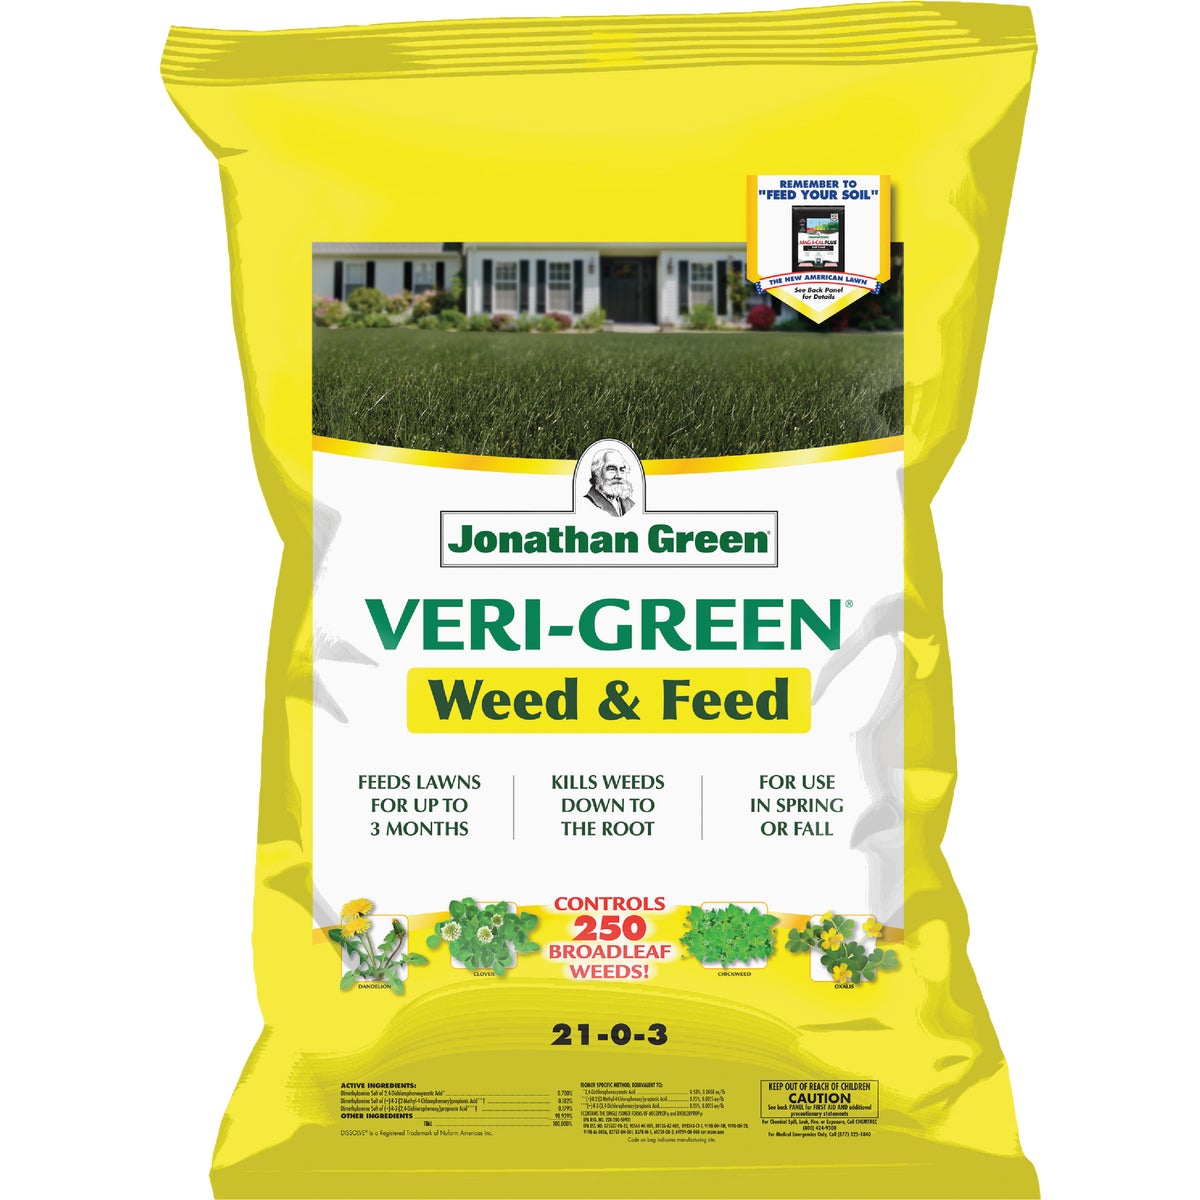 Jonathan Green Veri-Green Weed & Feed 46 Lb. 15,000 Sq. Ft. 21-0-3 Lawn Fertilizer with Weed Killer